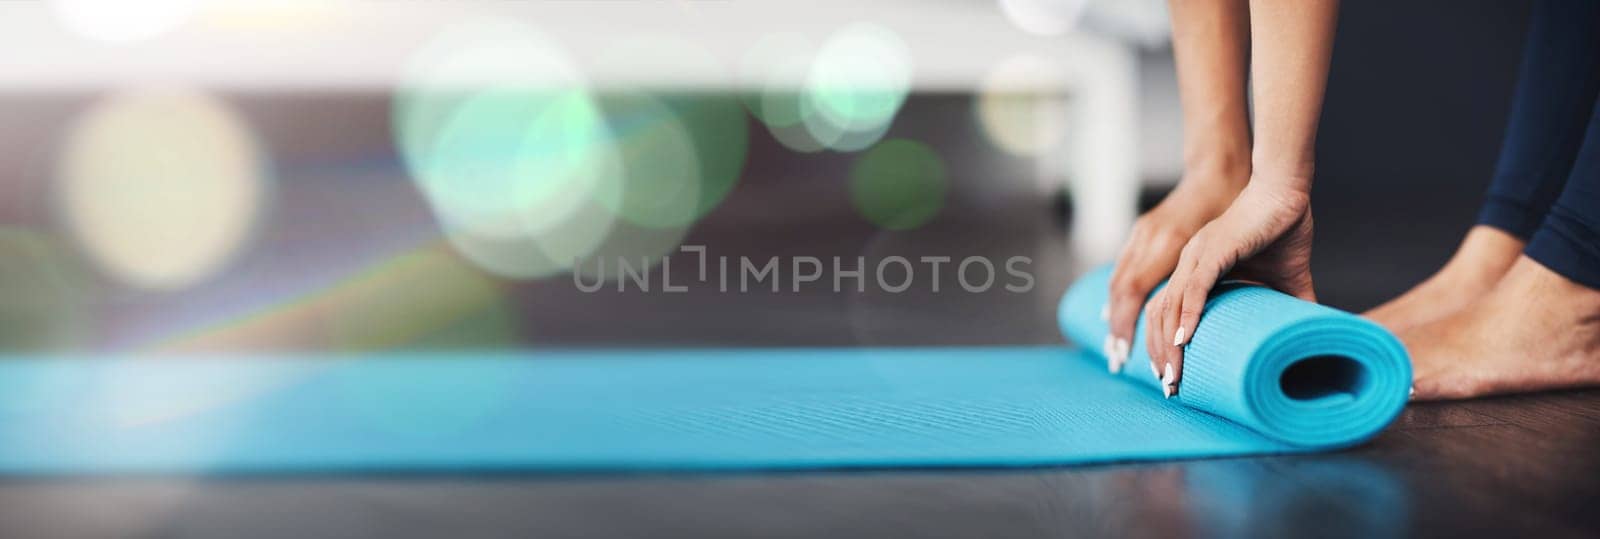 Woman, hands and mat on banner for yoga, fitness or preparation in pilates, zen or exercise on mockup. Closeup of female person or yogi on floor getting ready for wellness, gym or body health.